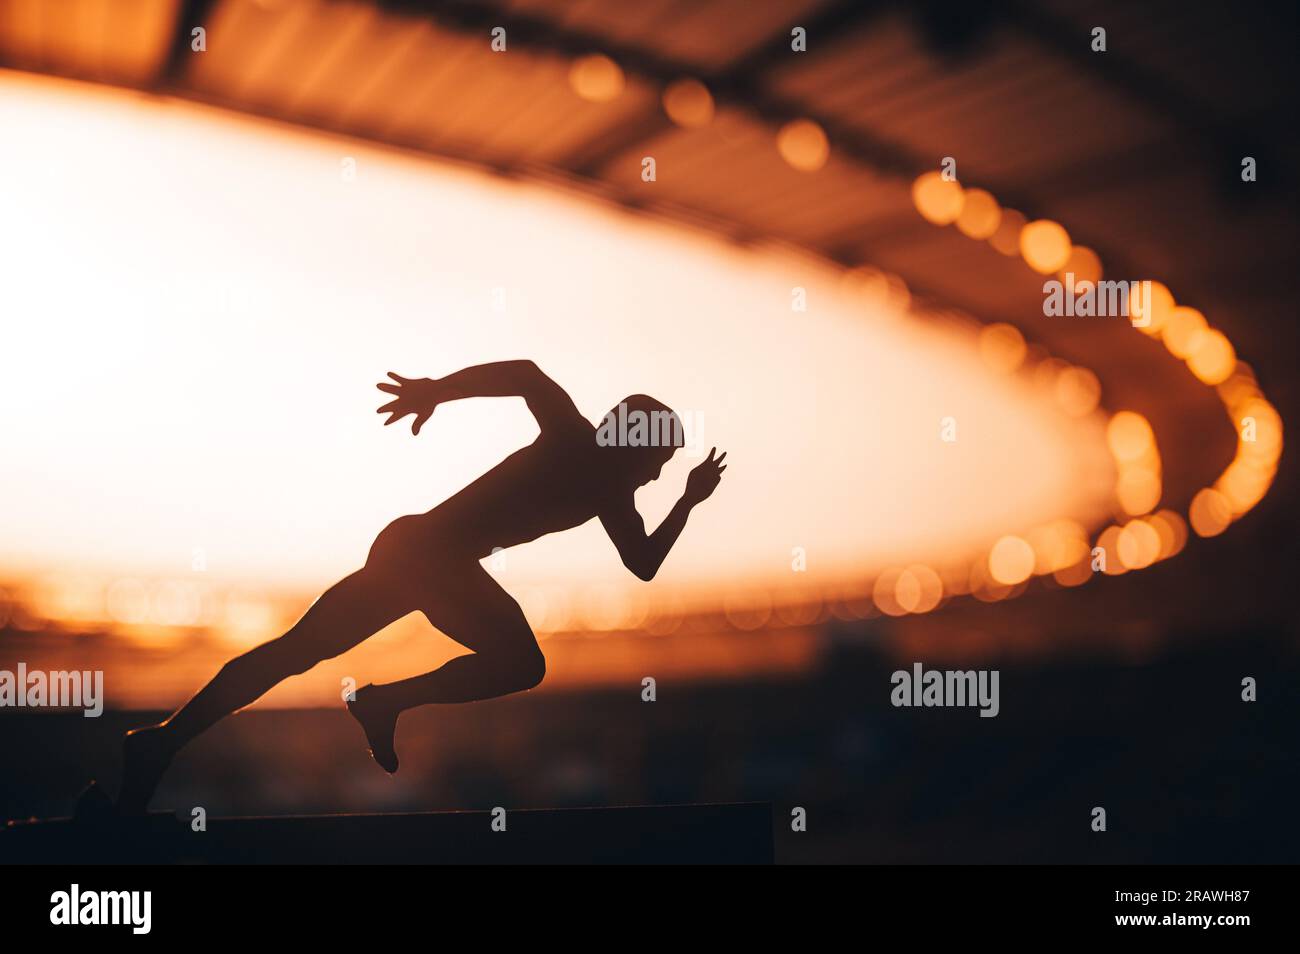 Chasing Glory: Silhouette of an Athlete, Primed for Speed, Standing Tall Amidst the Luminous Dusk at a Modern Sports Stadium. Warm sunset light. Edit Stock Photo